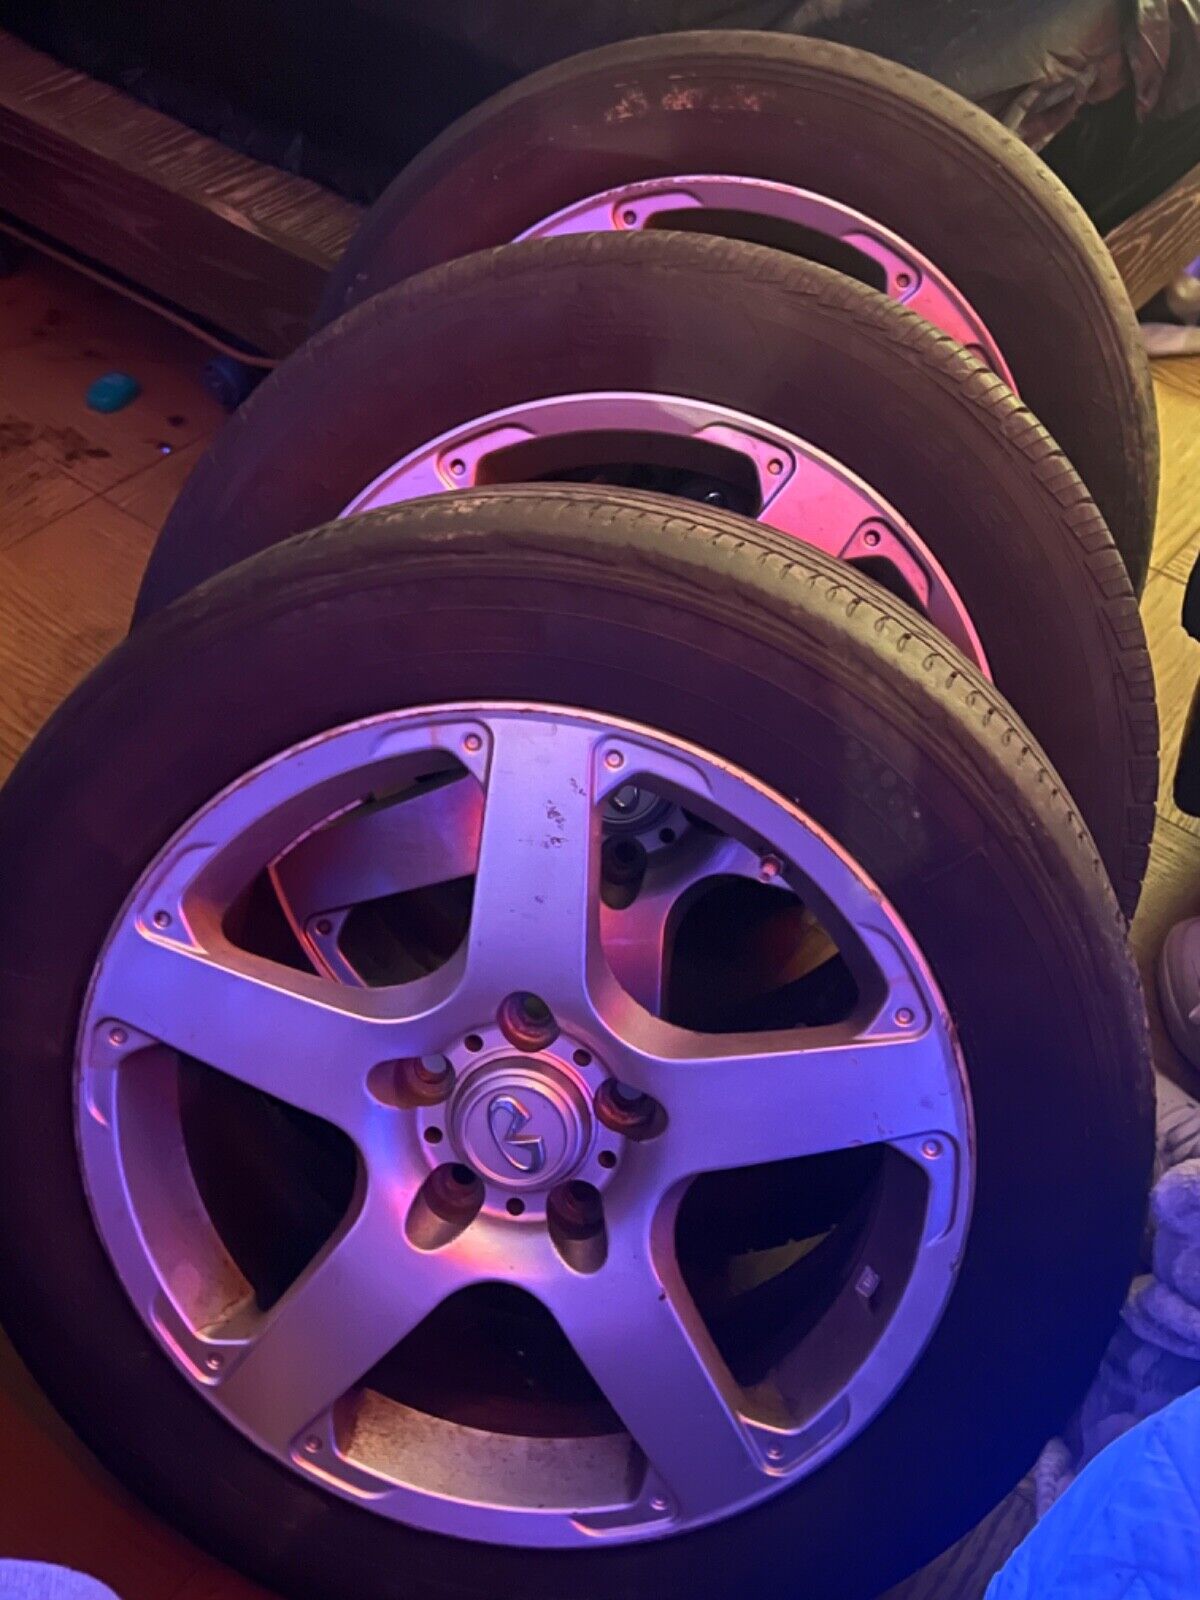 Infinity g35 wheels and tires (full set)